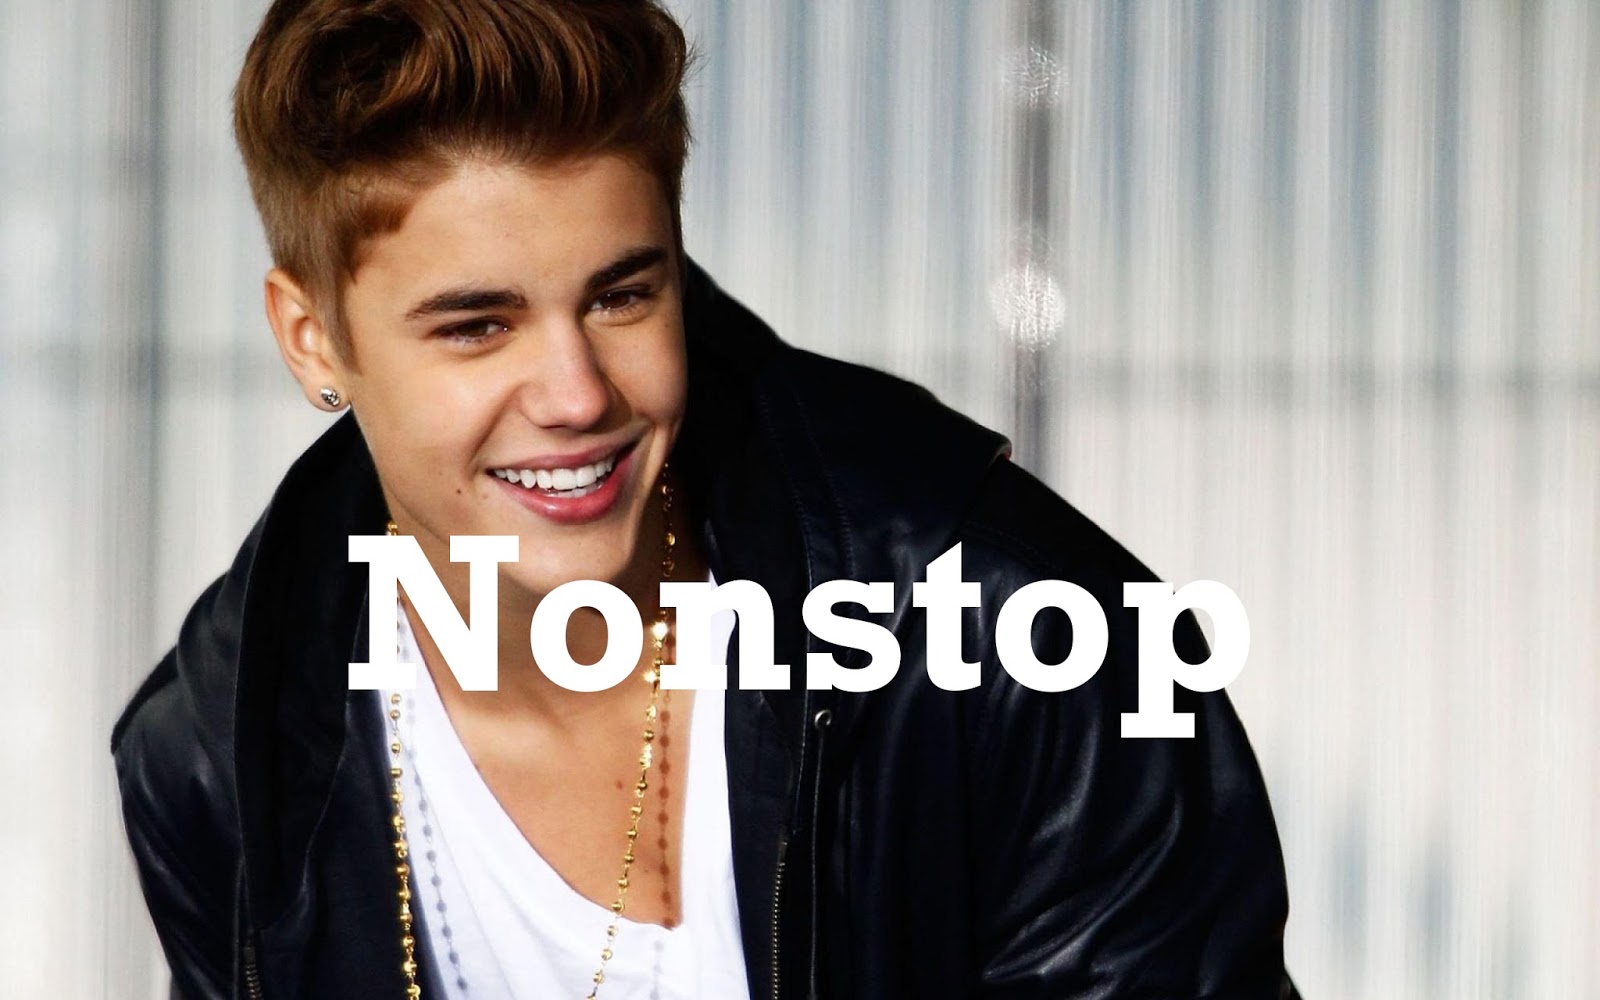 Free Direct Download Nonstop Mp3 Music: Justin Bieber Nonstop mp3 song1600 x 1000